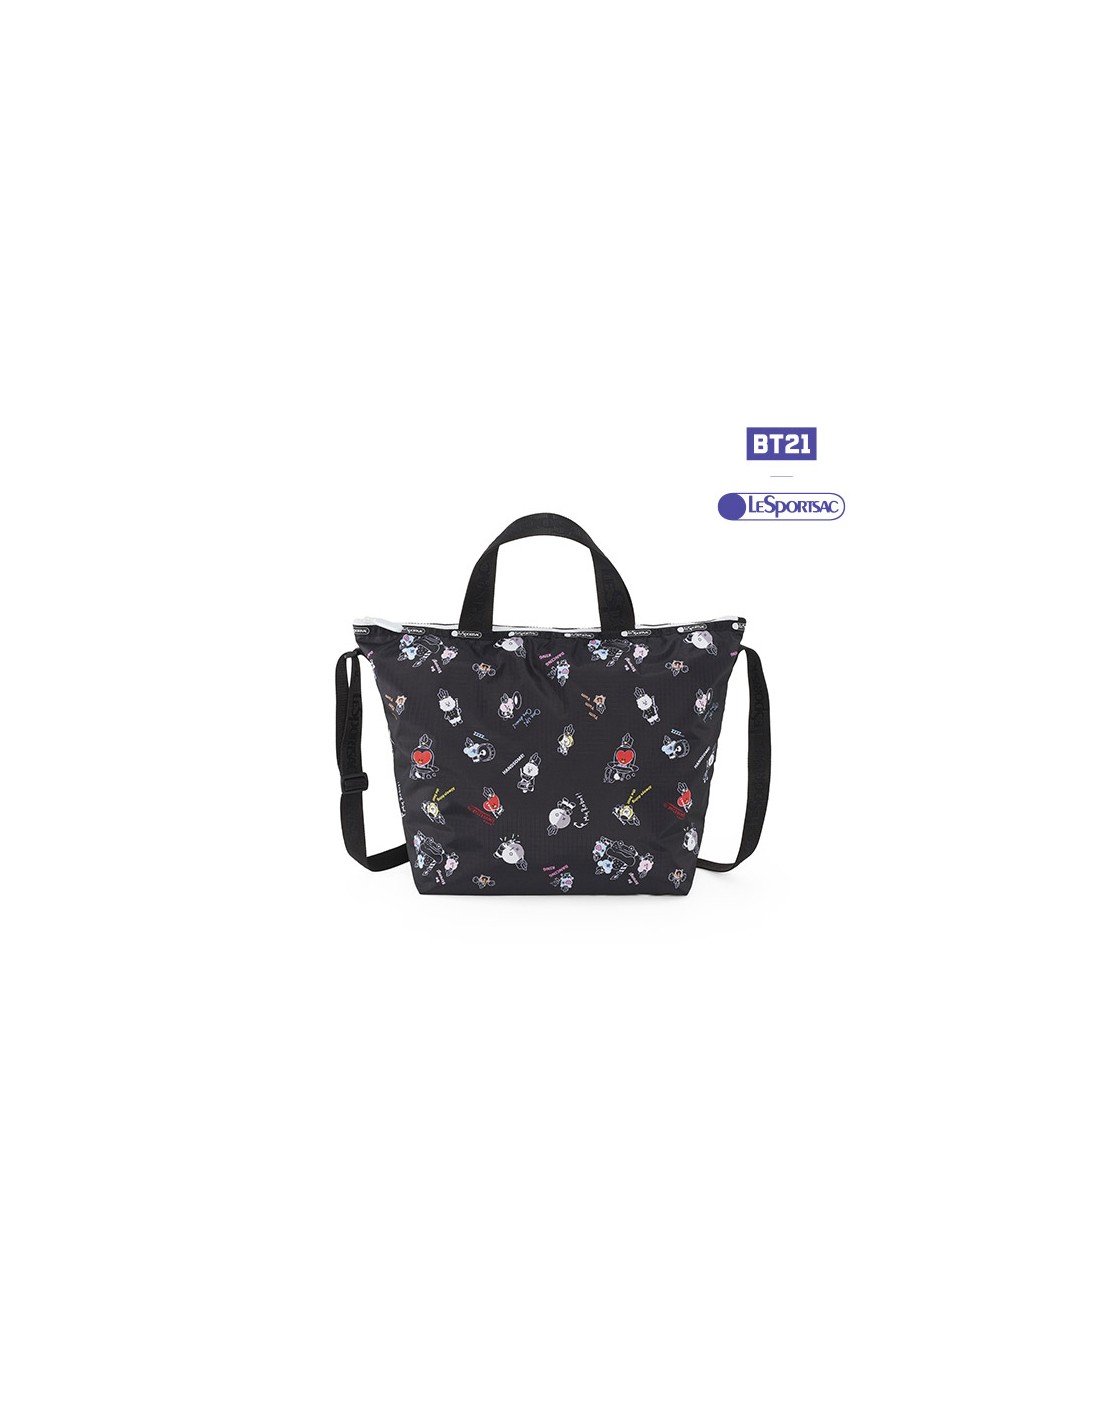 BT21] BTS. LESPORTSAC Collaboration - Easy Carry Tote Bag